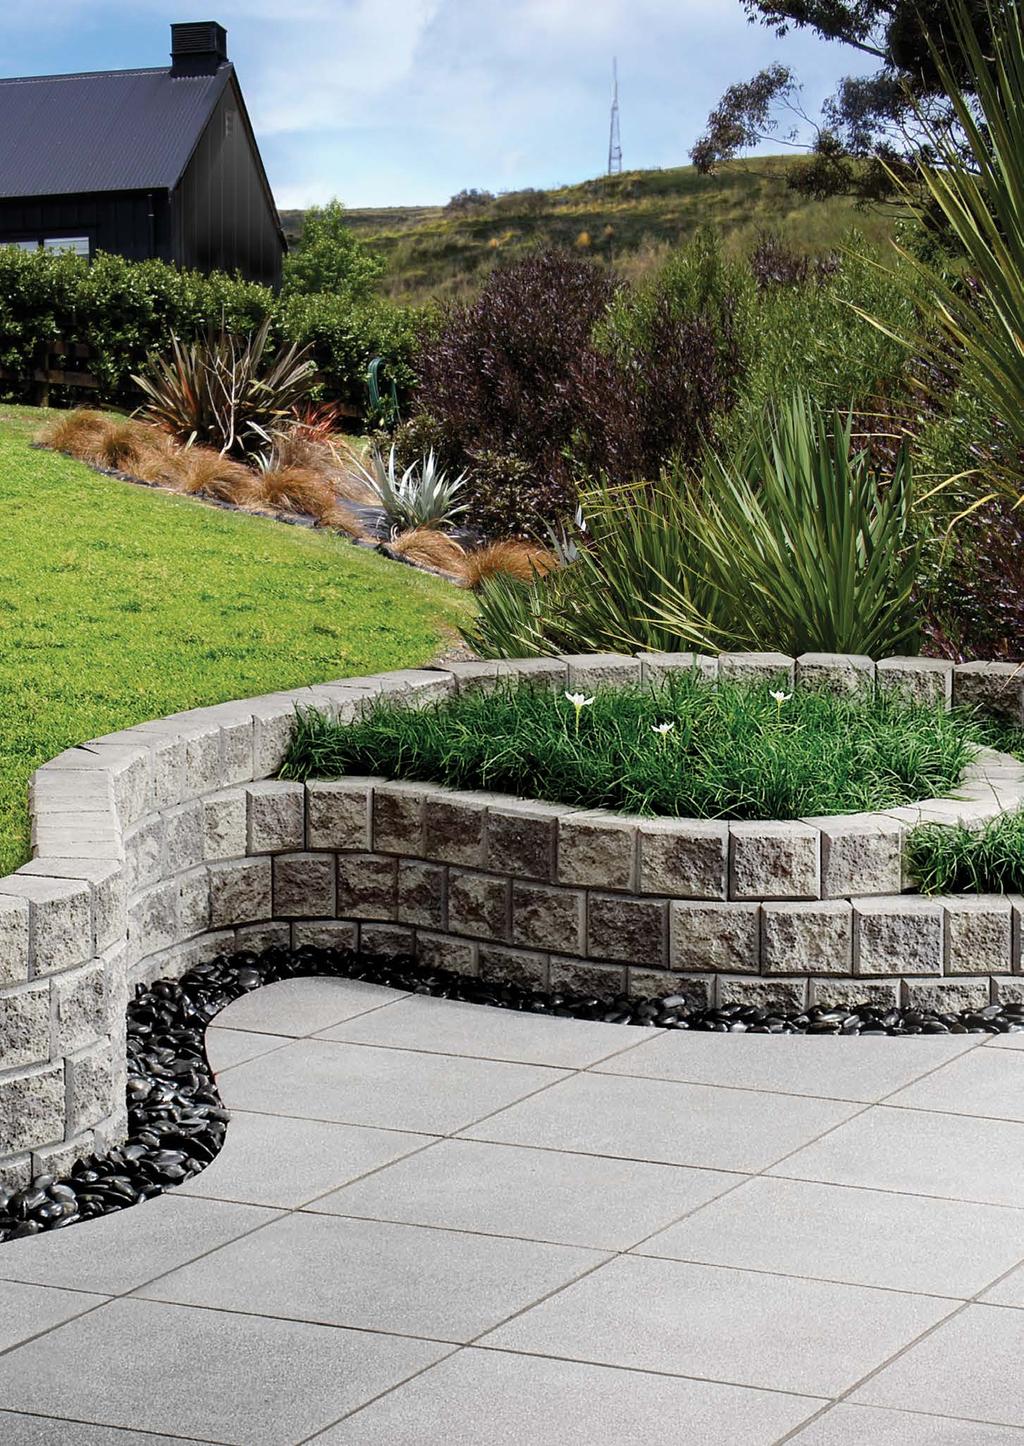 +low retaining 23 WITH firth s large range of concrete retaining walls, your outdoor LIVING DESIGN POSSIBILITIES ARE VIRTUALLY ENDLESS.